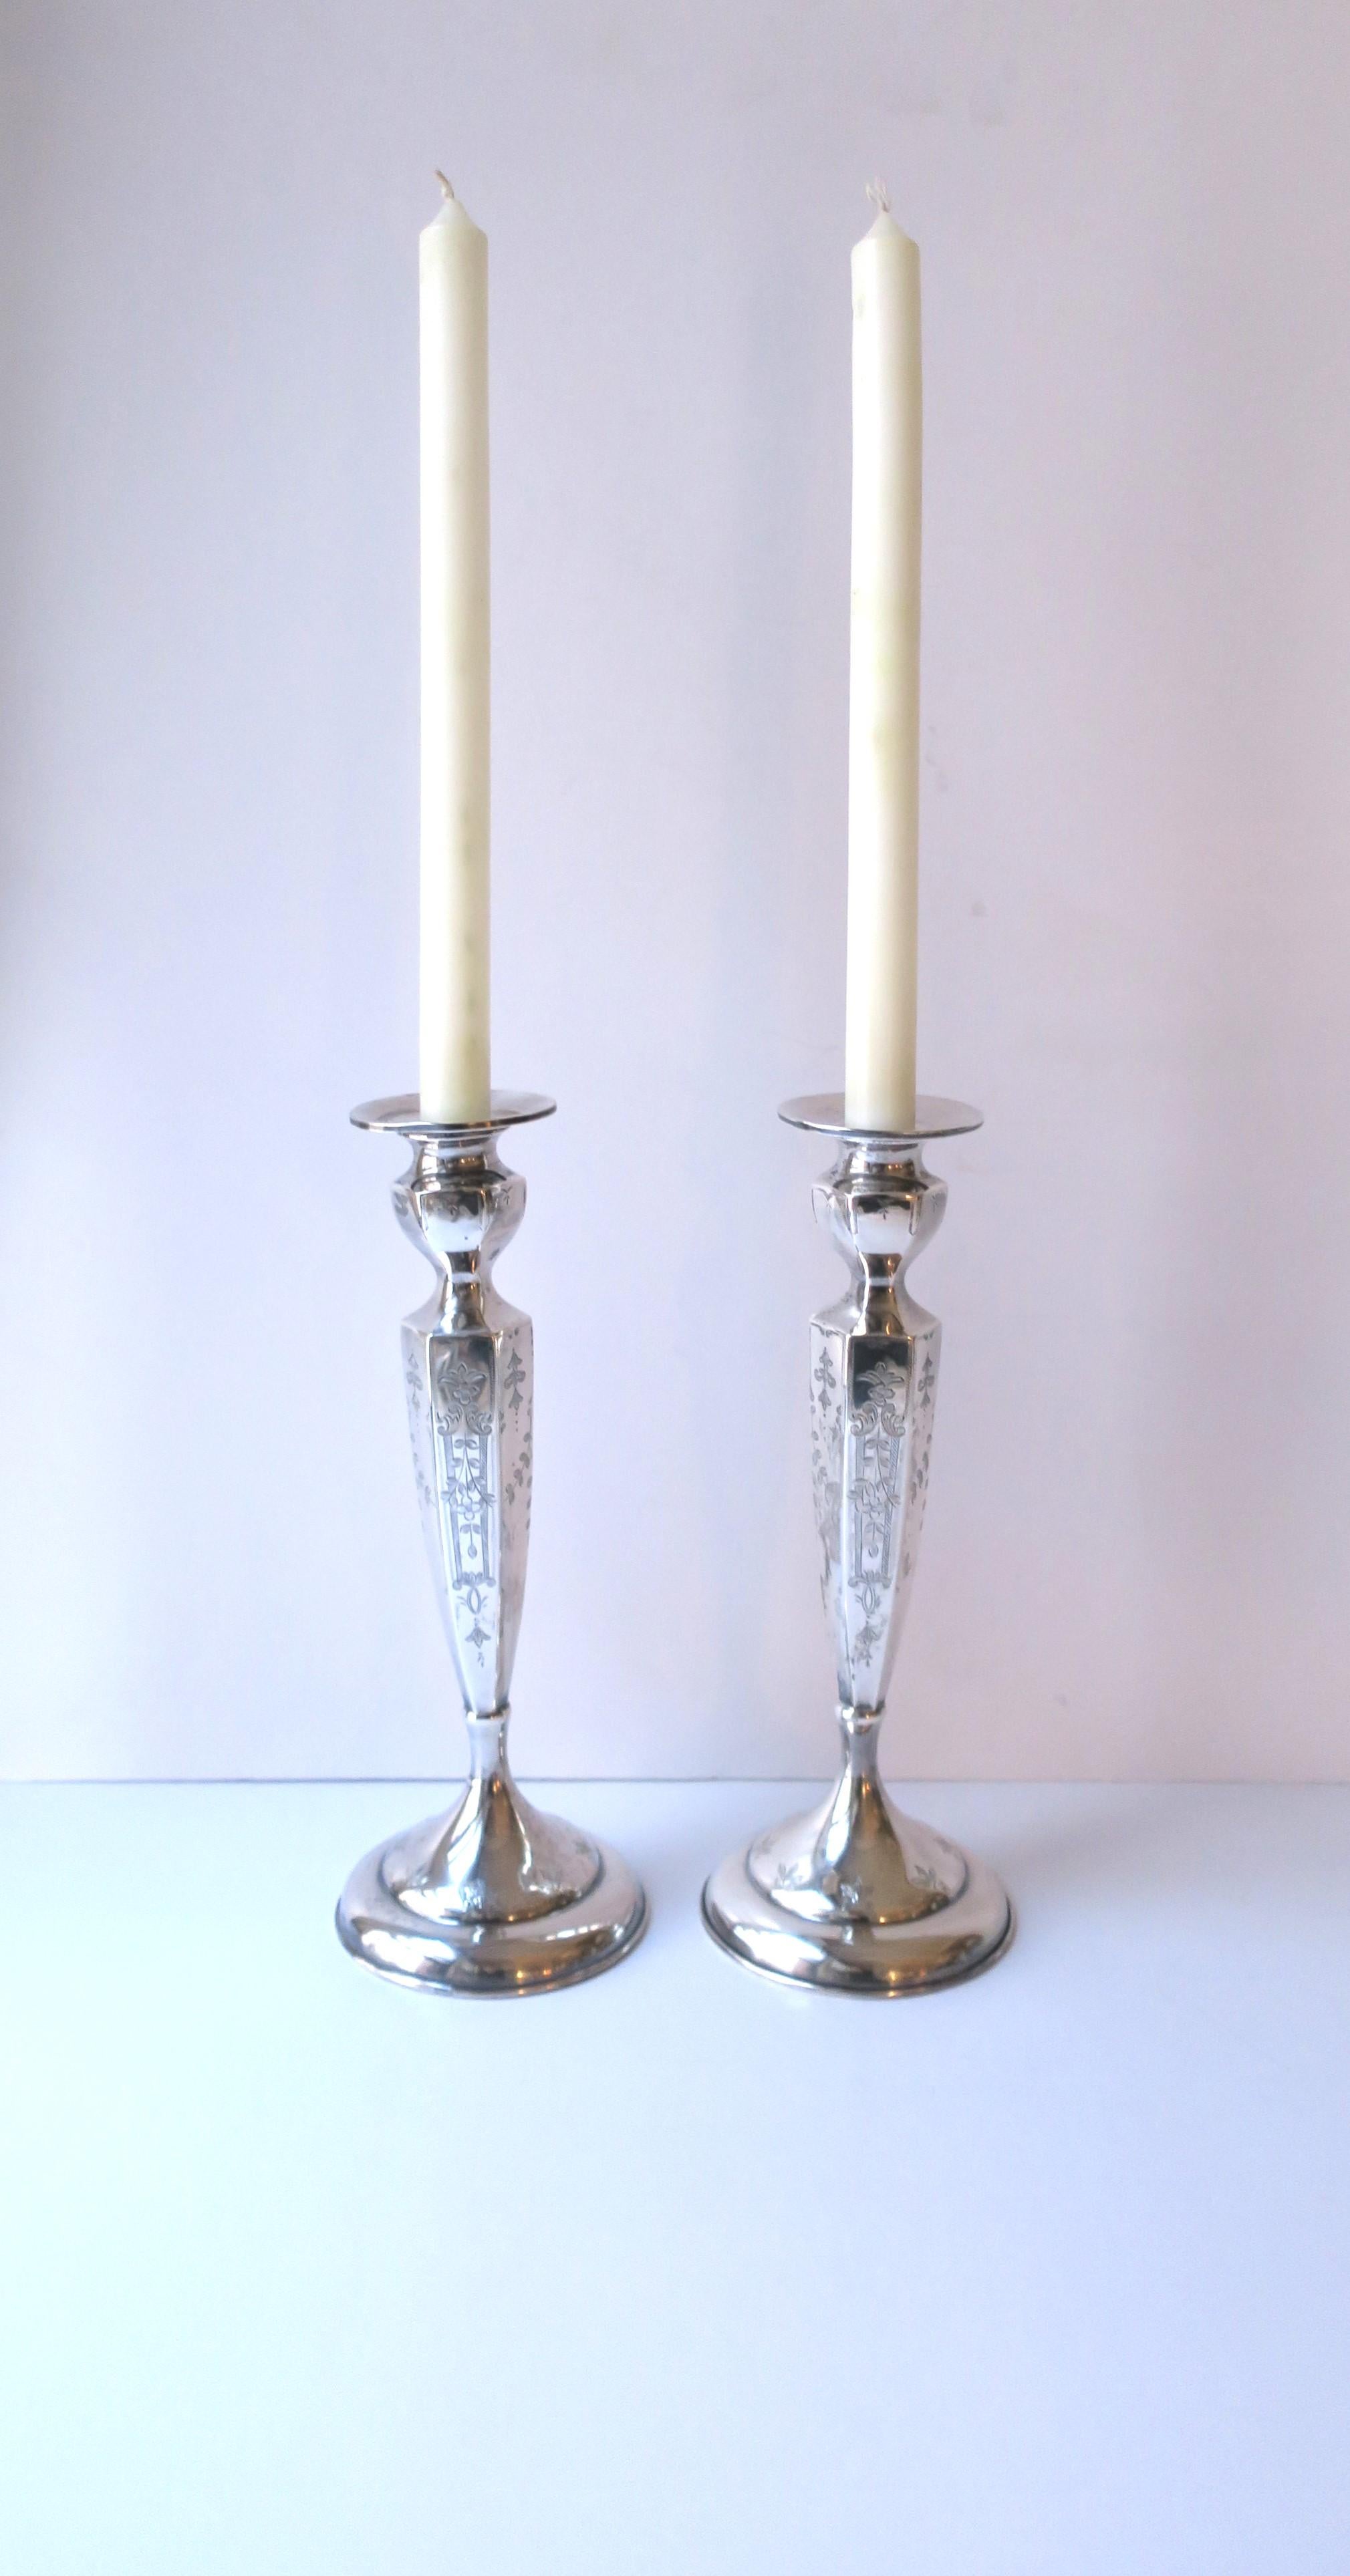 A beautiful pair of sterling silver candlestick holders, in the Victorian/Edwardian design, by J.E. Caldwell & Co., circa early-20th century, USA. A beautiful set with floral and leaf detail, hexagon shape and round base. A great set for a dining